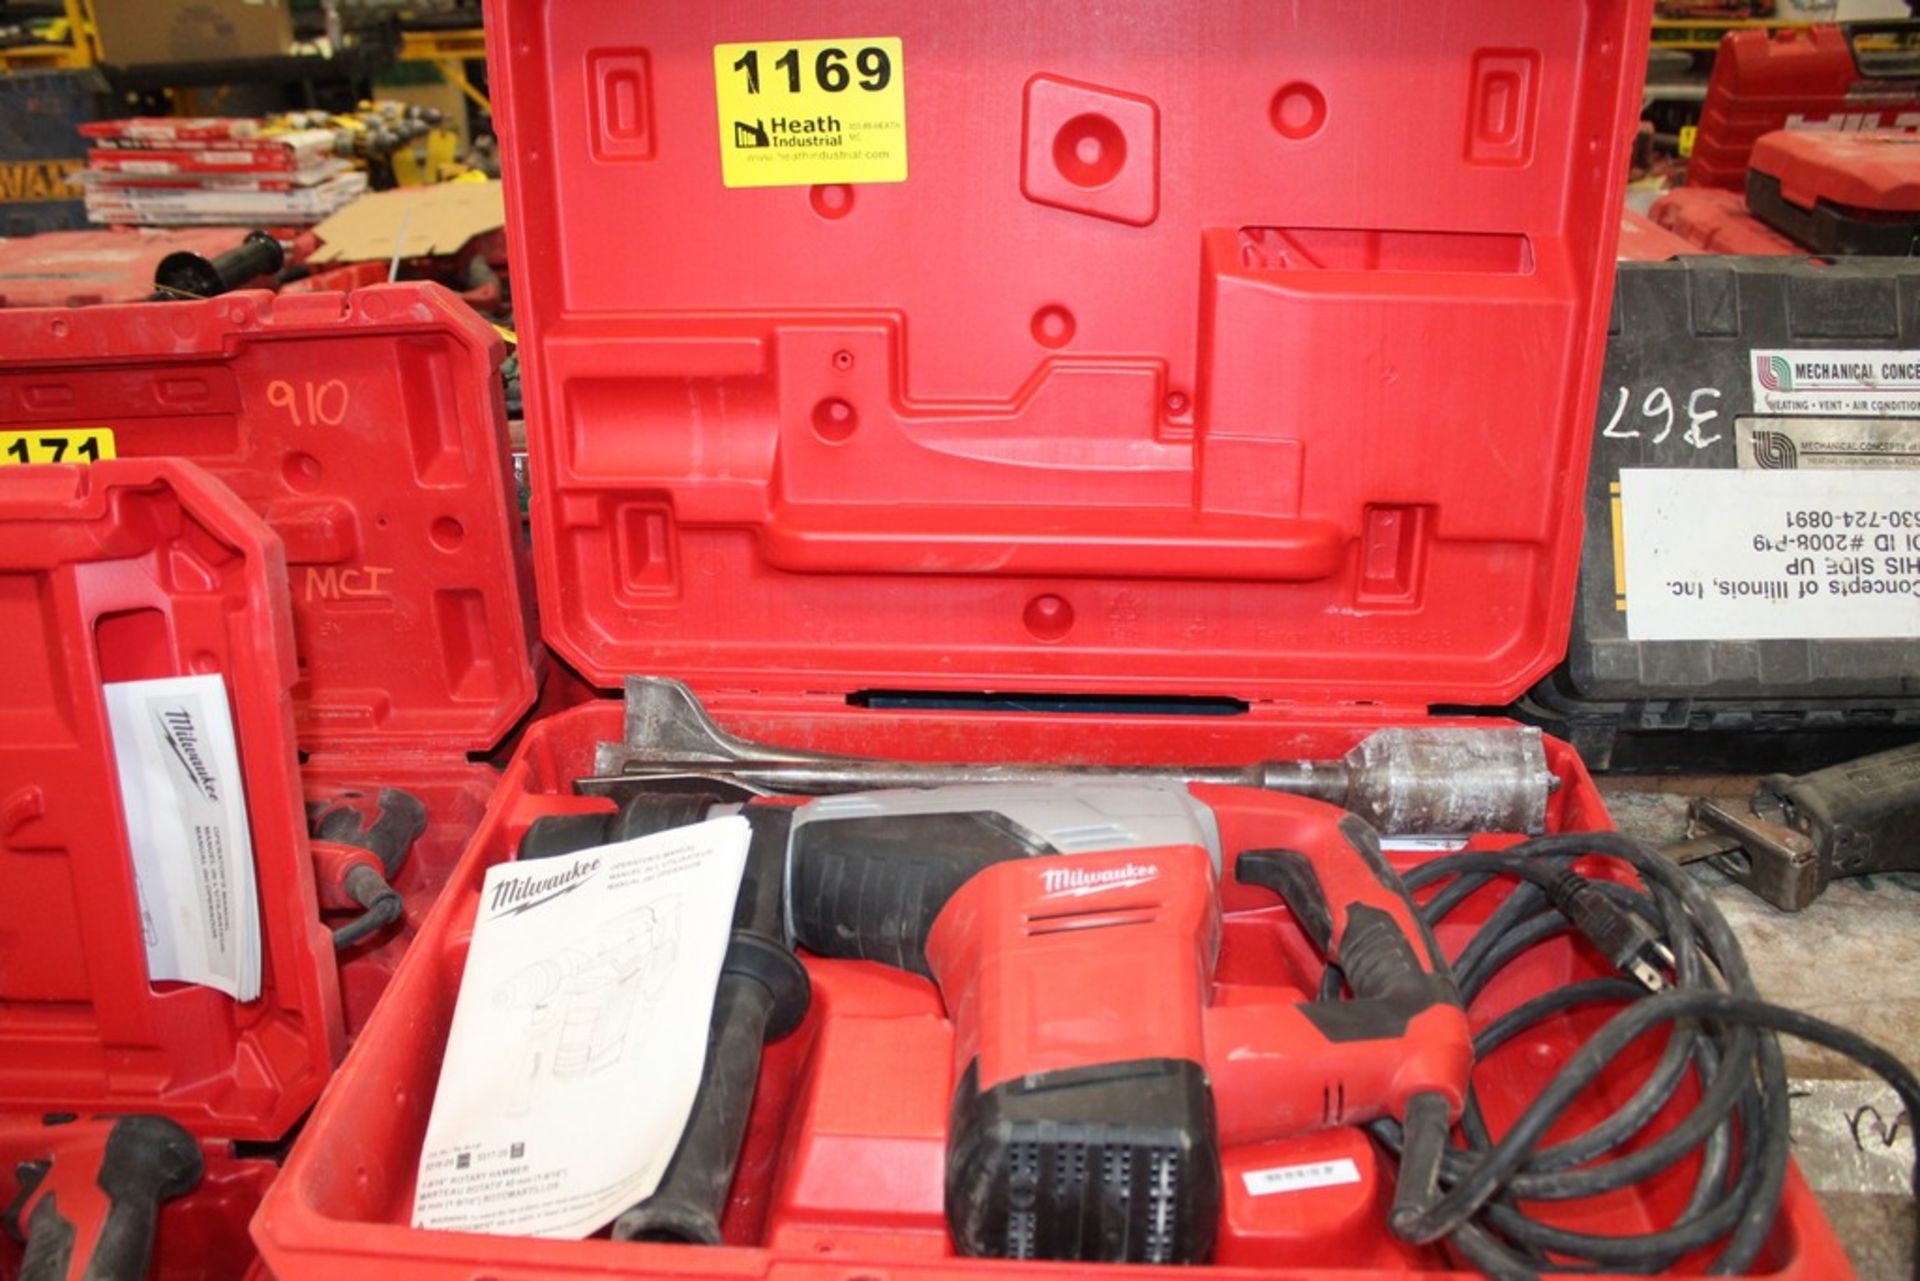 MILWAUKEE CAT. NO. 5317-20 1-9/16" ROTARY HAMMER WITH CASE - Image 4 of 4